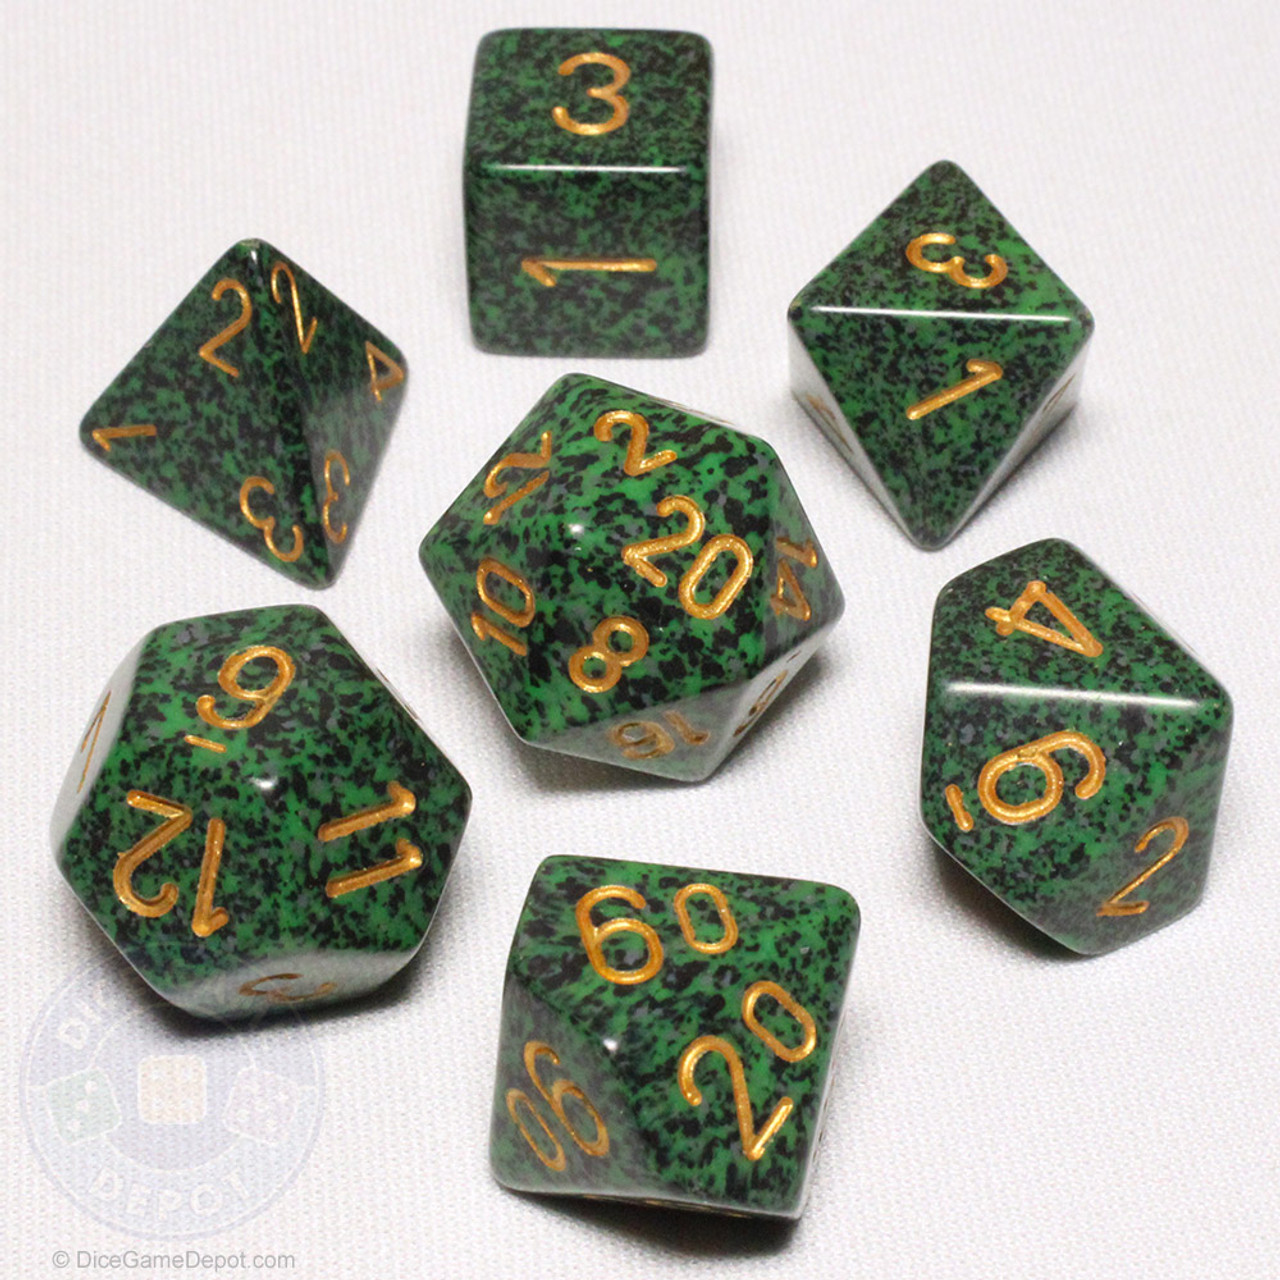 Chessex D&D Dice 16Mm Speckled Golden Recon Plastic Polyhedral Dnd Dice Set 